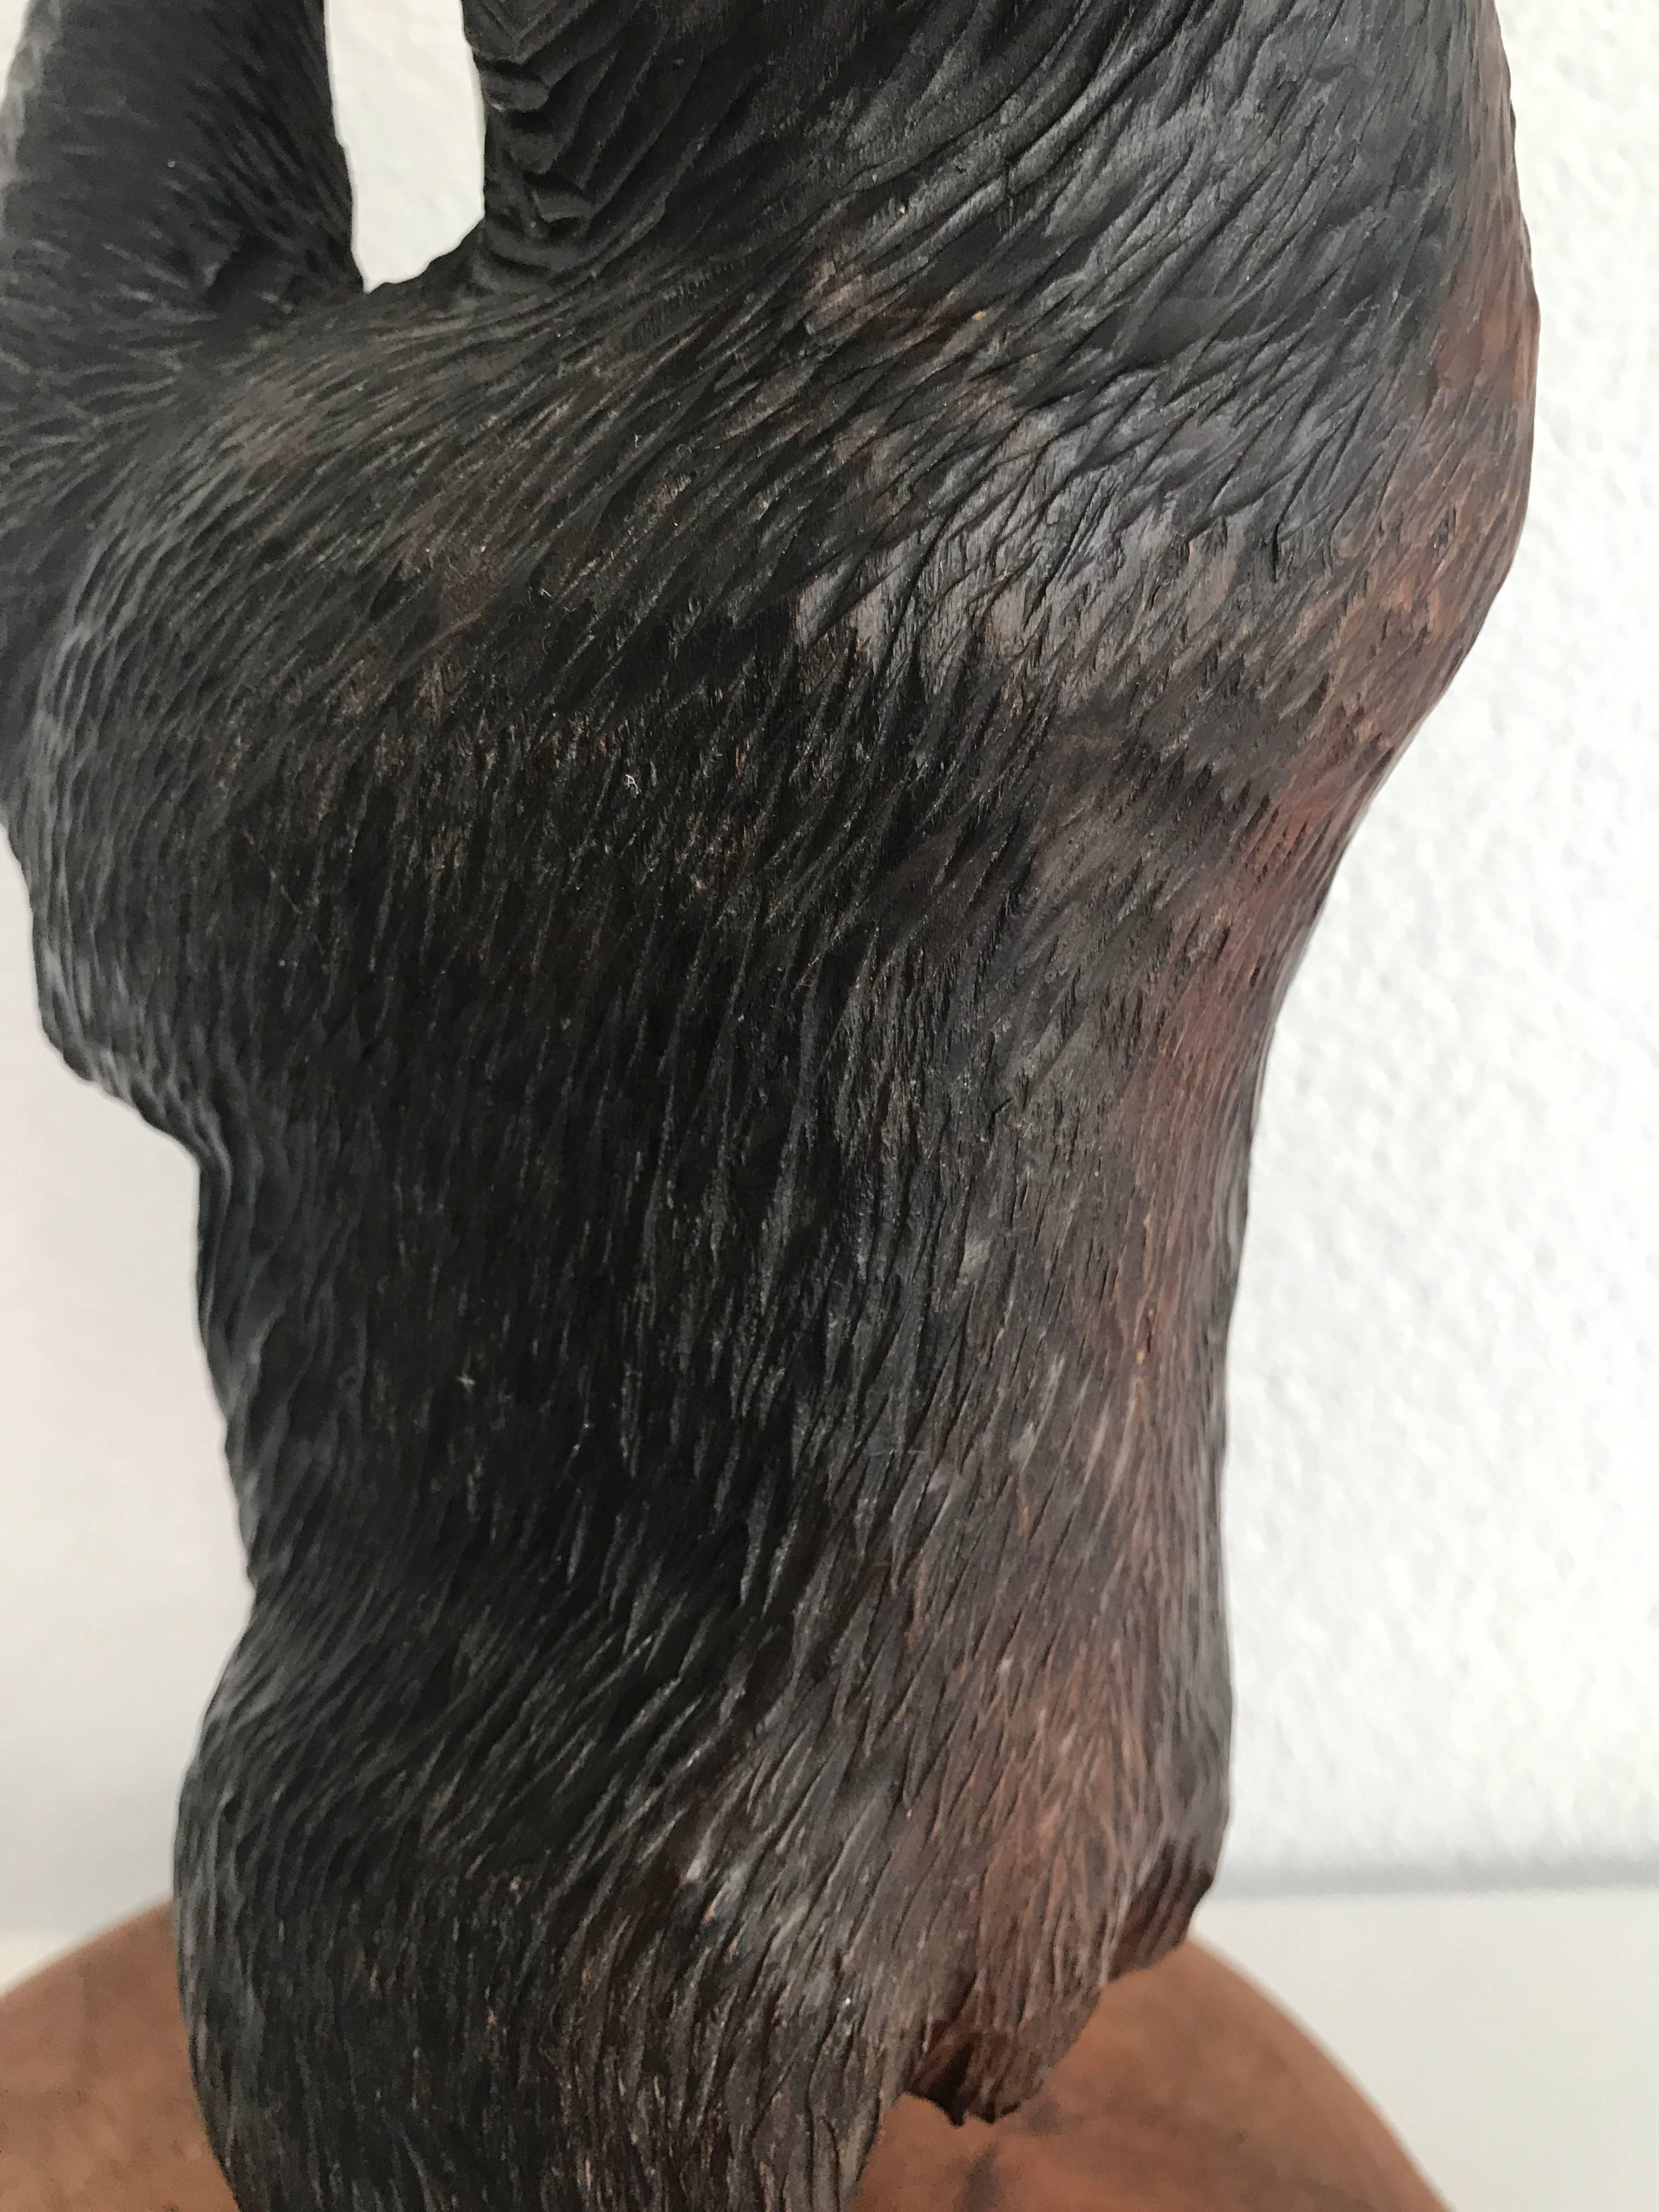 Beautiful quality and perfect condition bear lamp. 

This Black Forest bear is carved in a beautiful pose. In this rare table lamp sculpture he is holding up a ball, which is the base for the light socket and shade. It is handcrafted antiques like